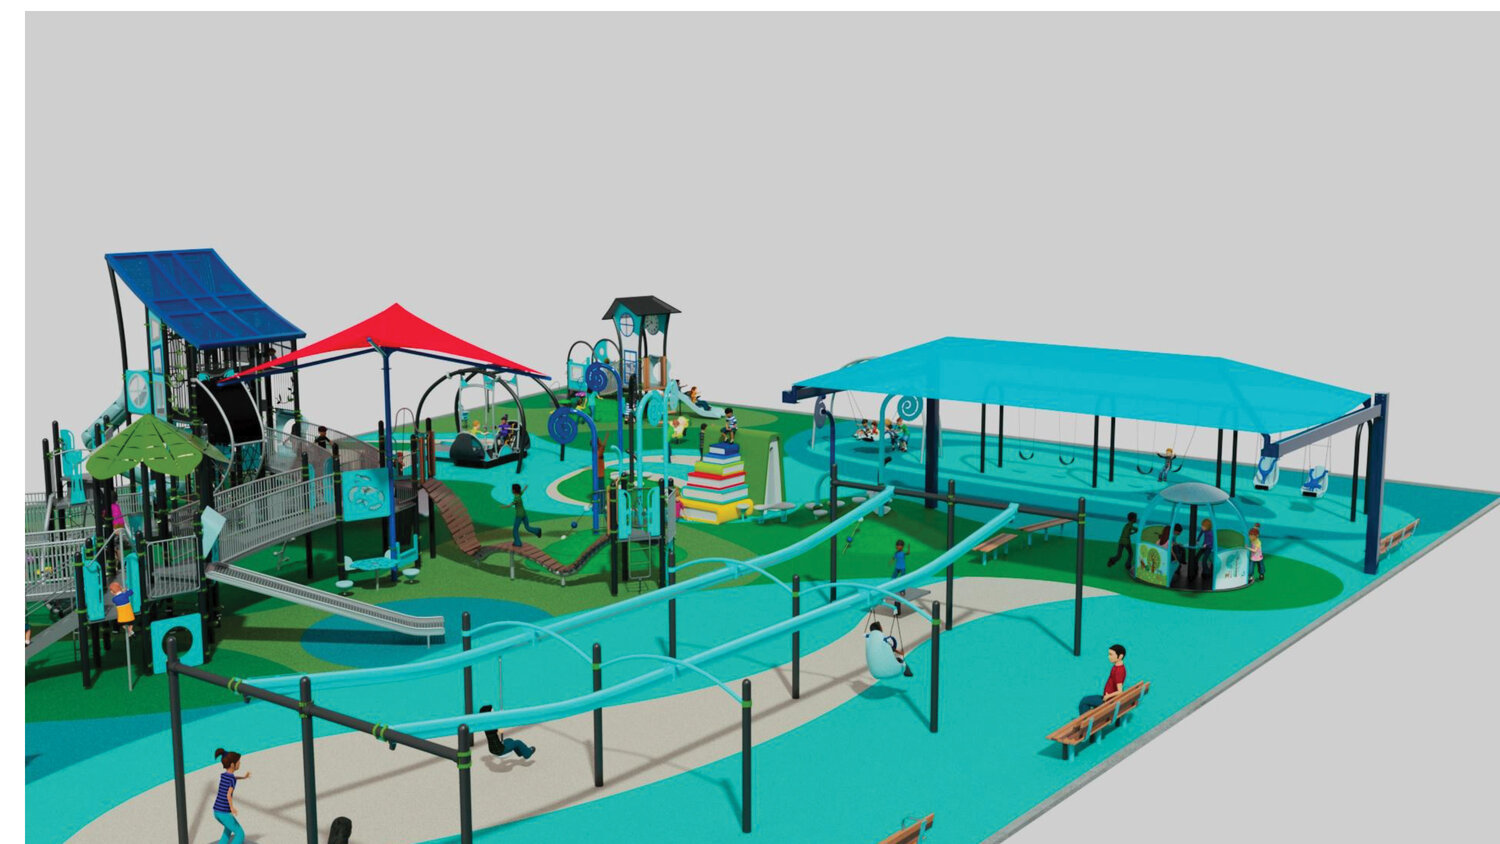 A playground “with a Minnesota twist” is planned for east of the soccer stadium.